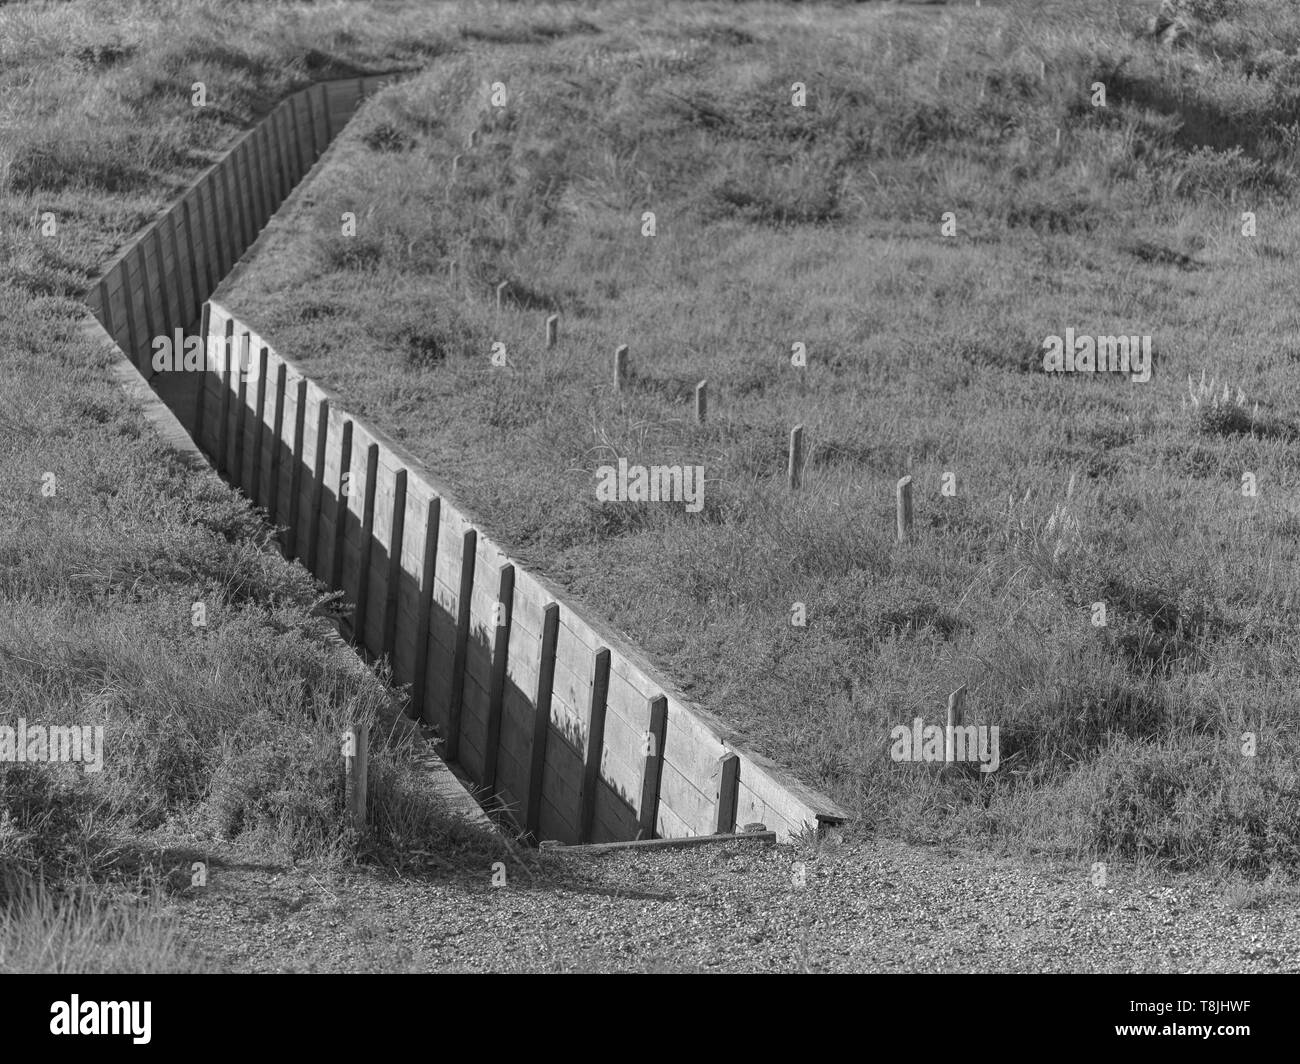 Trench of the German Atlanitkwall Atlanticwall of the World War 2, still remaining history to be seen in the Bunker Museum of IJmuiden Holland Stock Photo